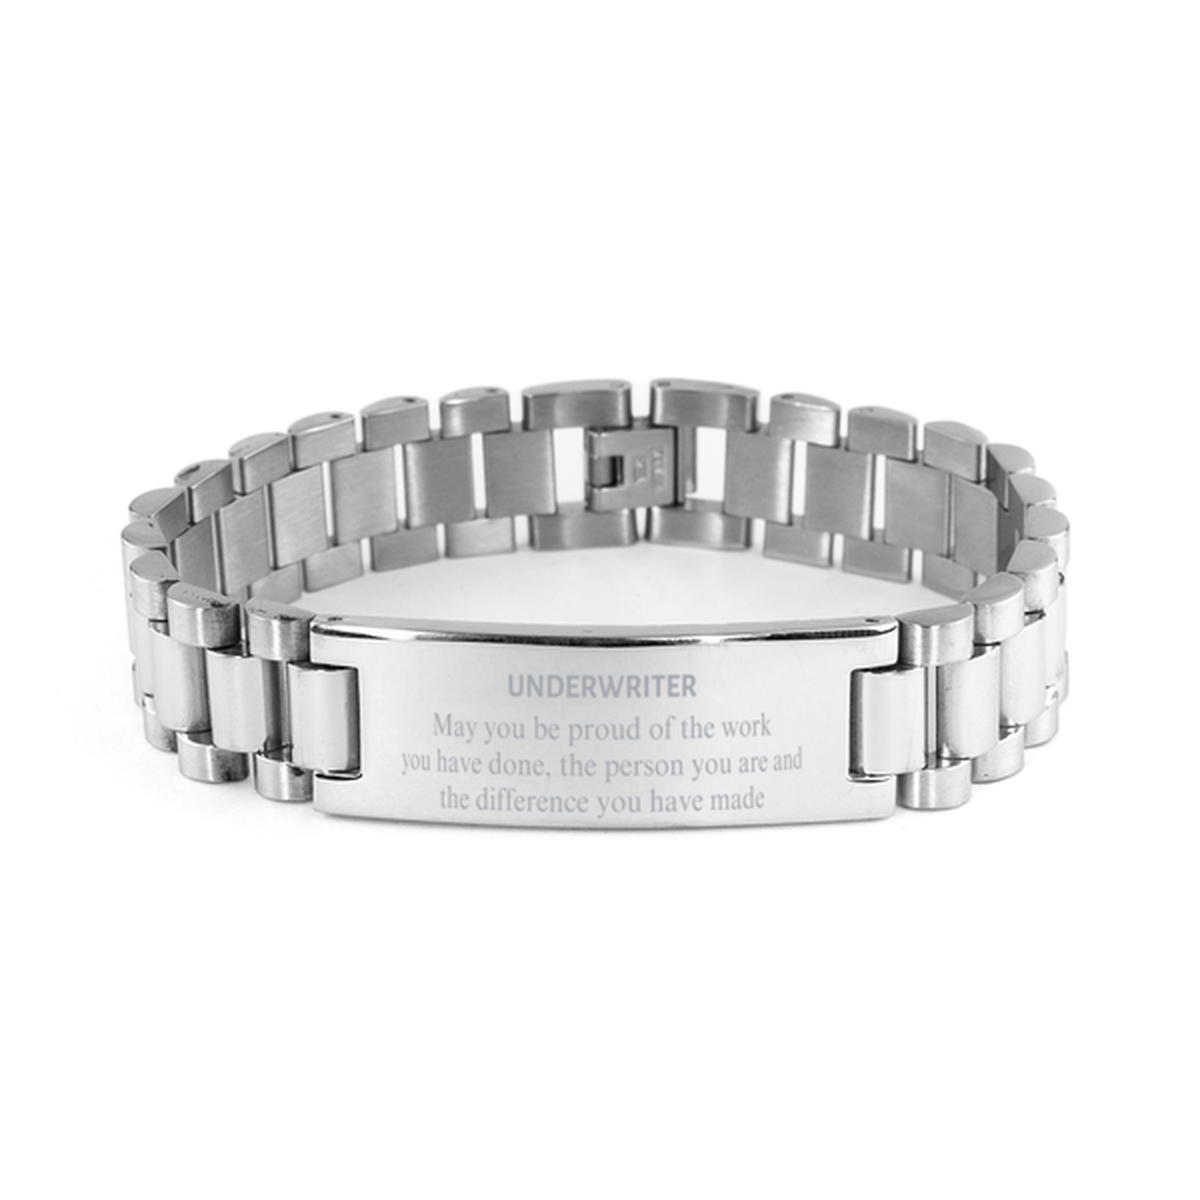 Underwriter May you be proud of the work you have done, Retirement Underwriter Ladder Stainless Steel Bracelet for Colleague Appreciation Gifts Amazing for Underwriter